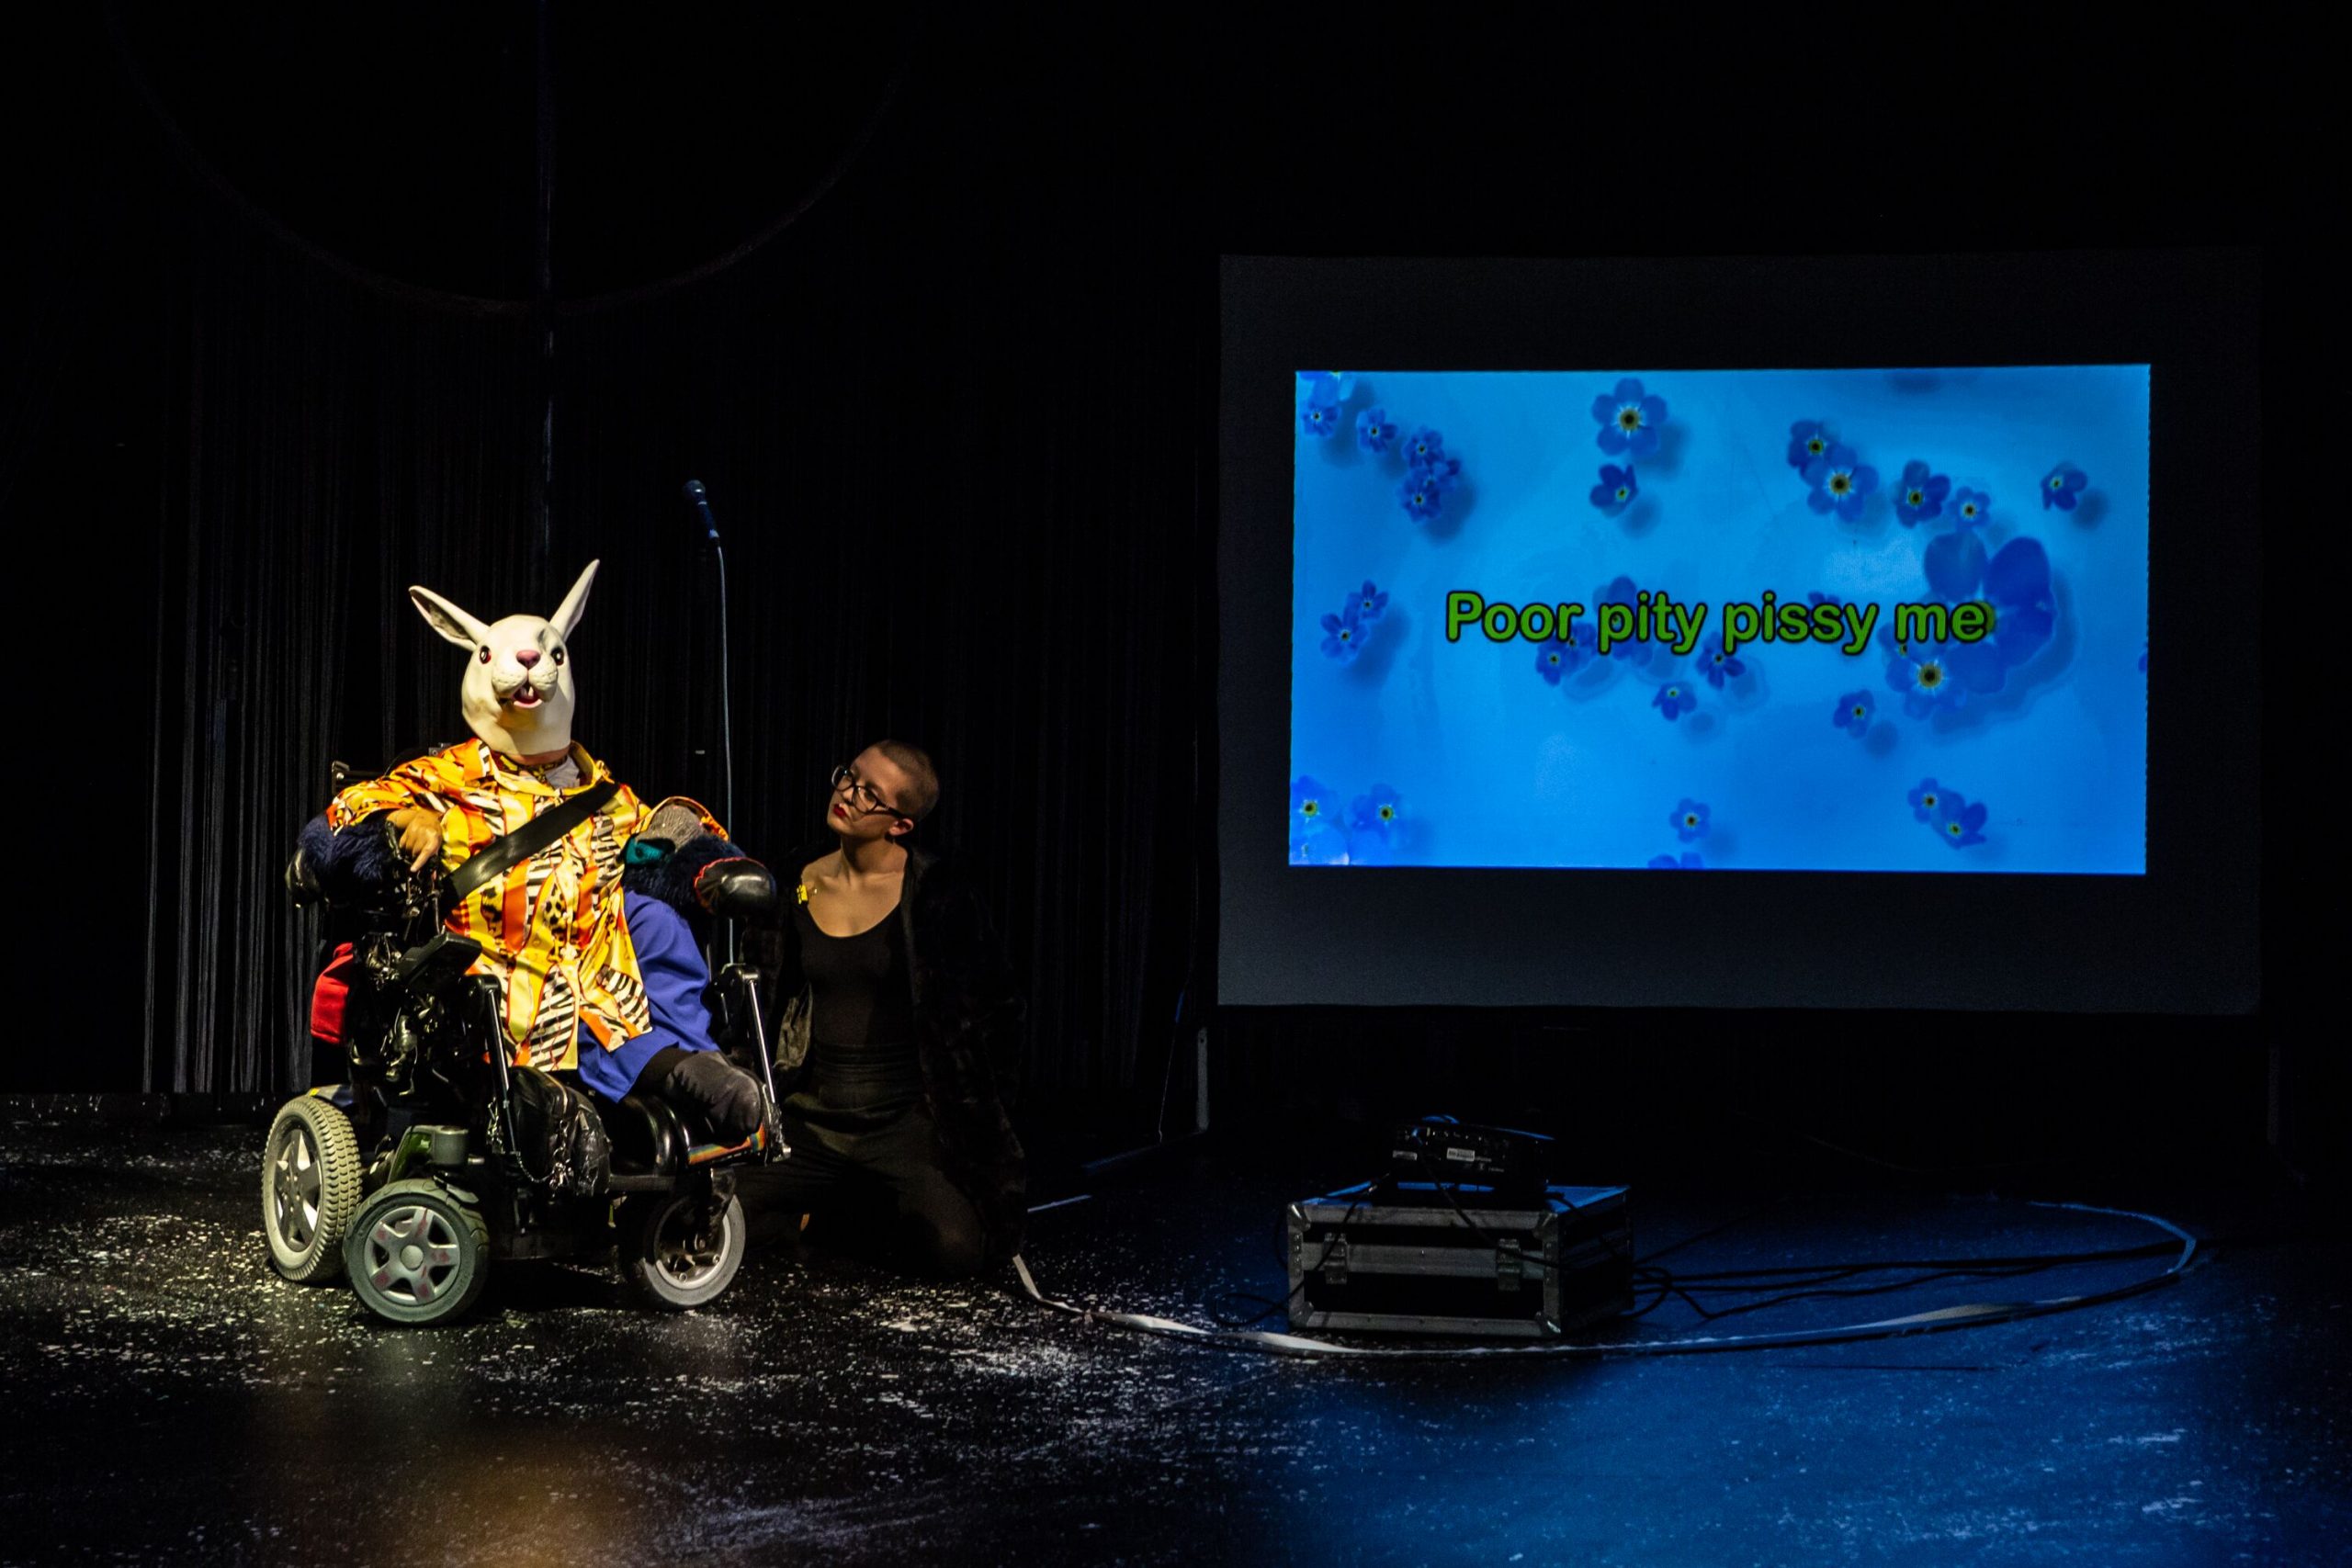 The artist is in a wheelchair and wearing a rabbit mask. To her side is her assistant. There is a screen to the right with the words 'poor pitty pissy me' projected.